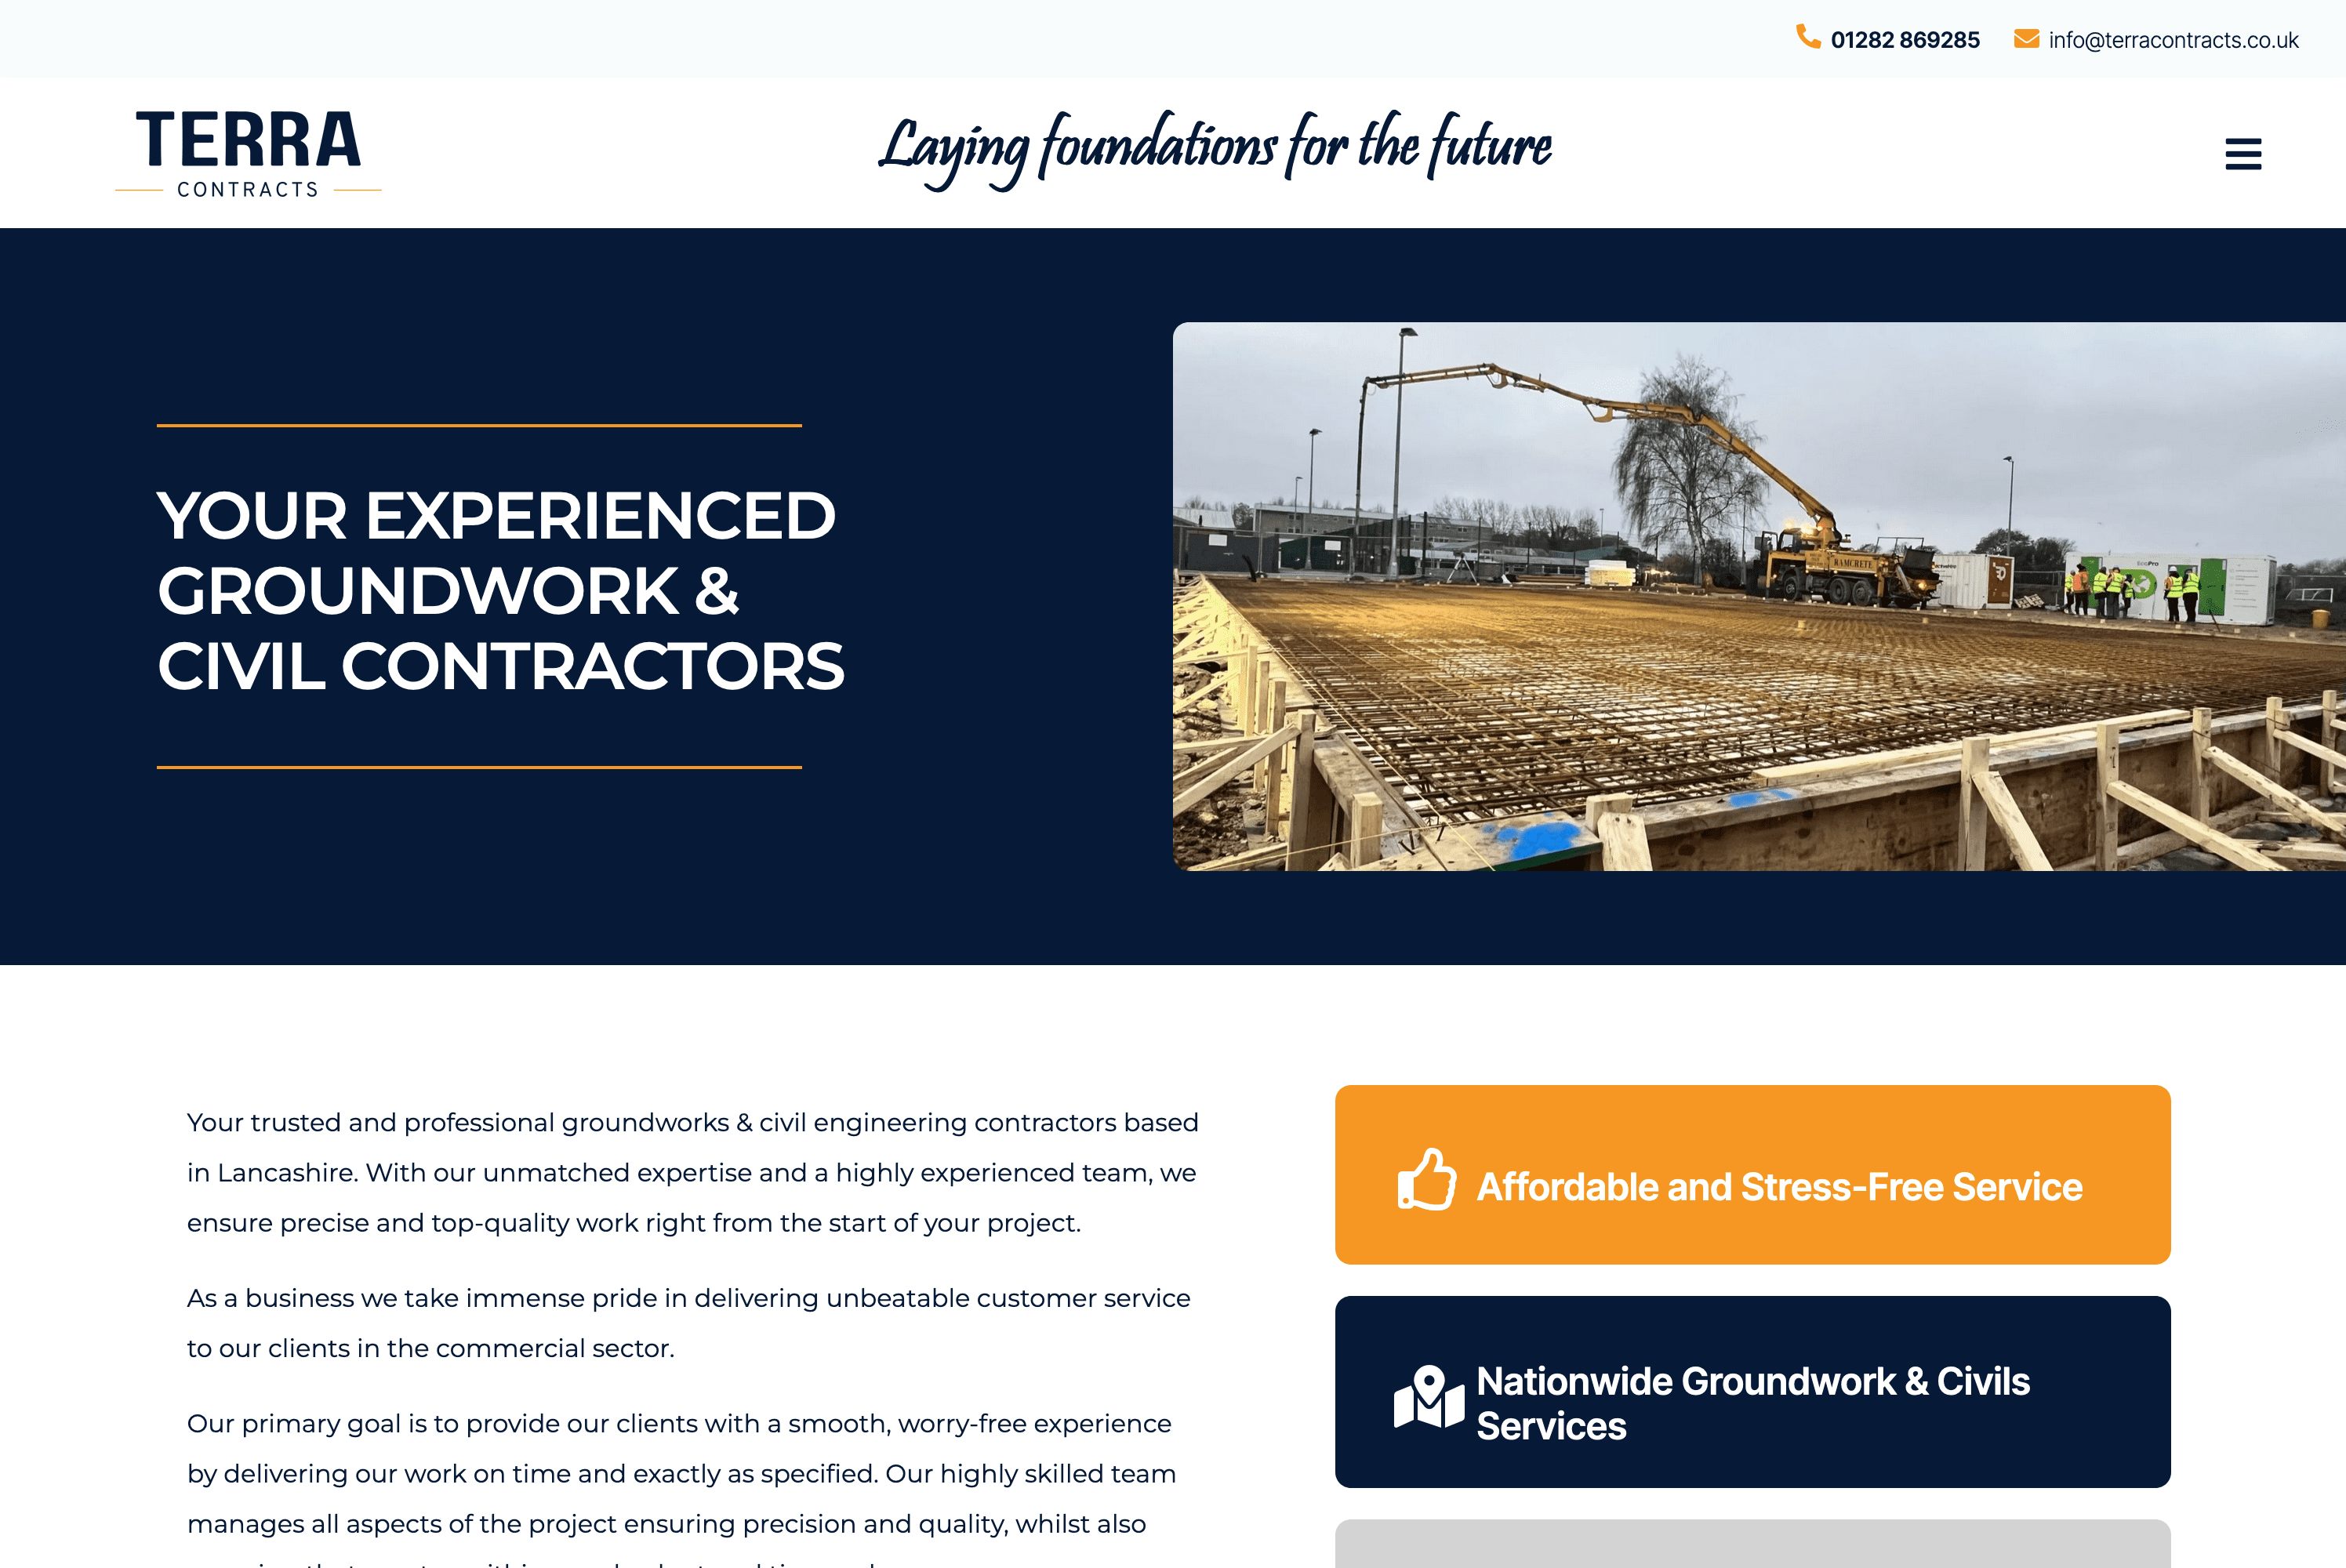 Terra Contracts